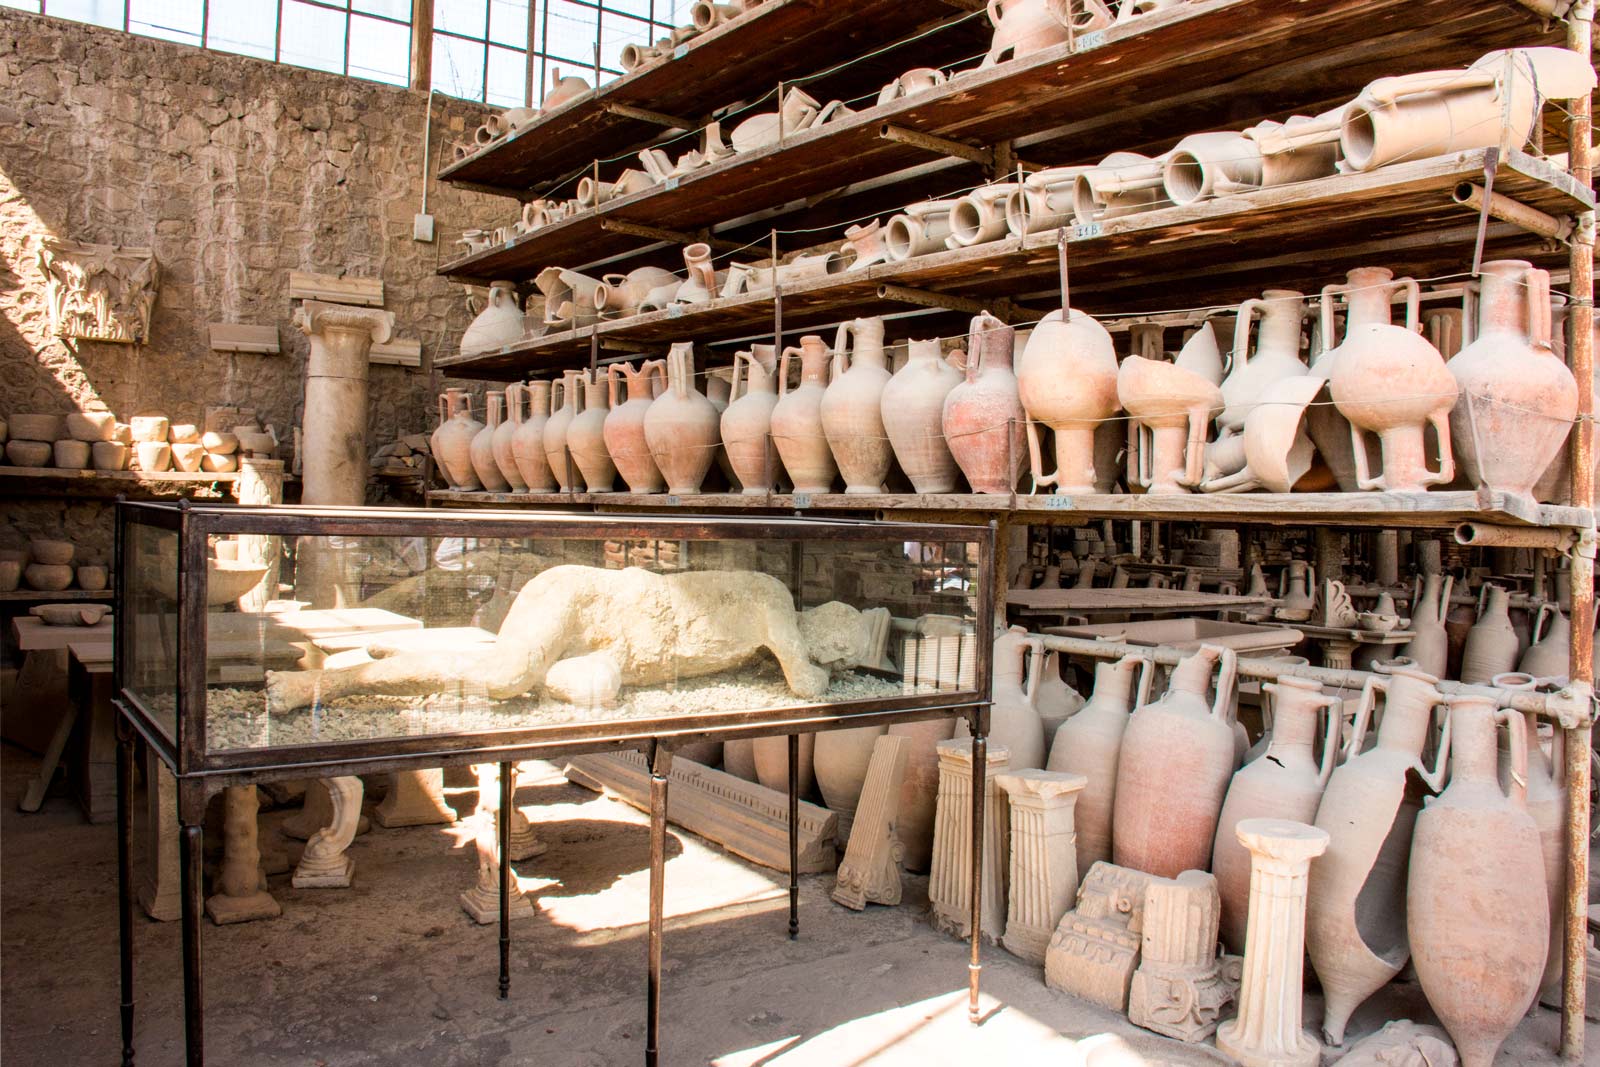 Archaeological finds found in Pompeii